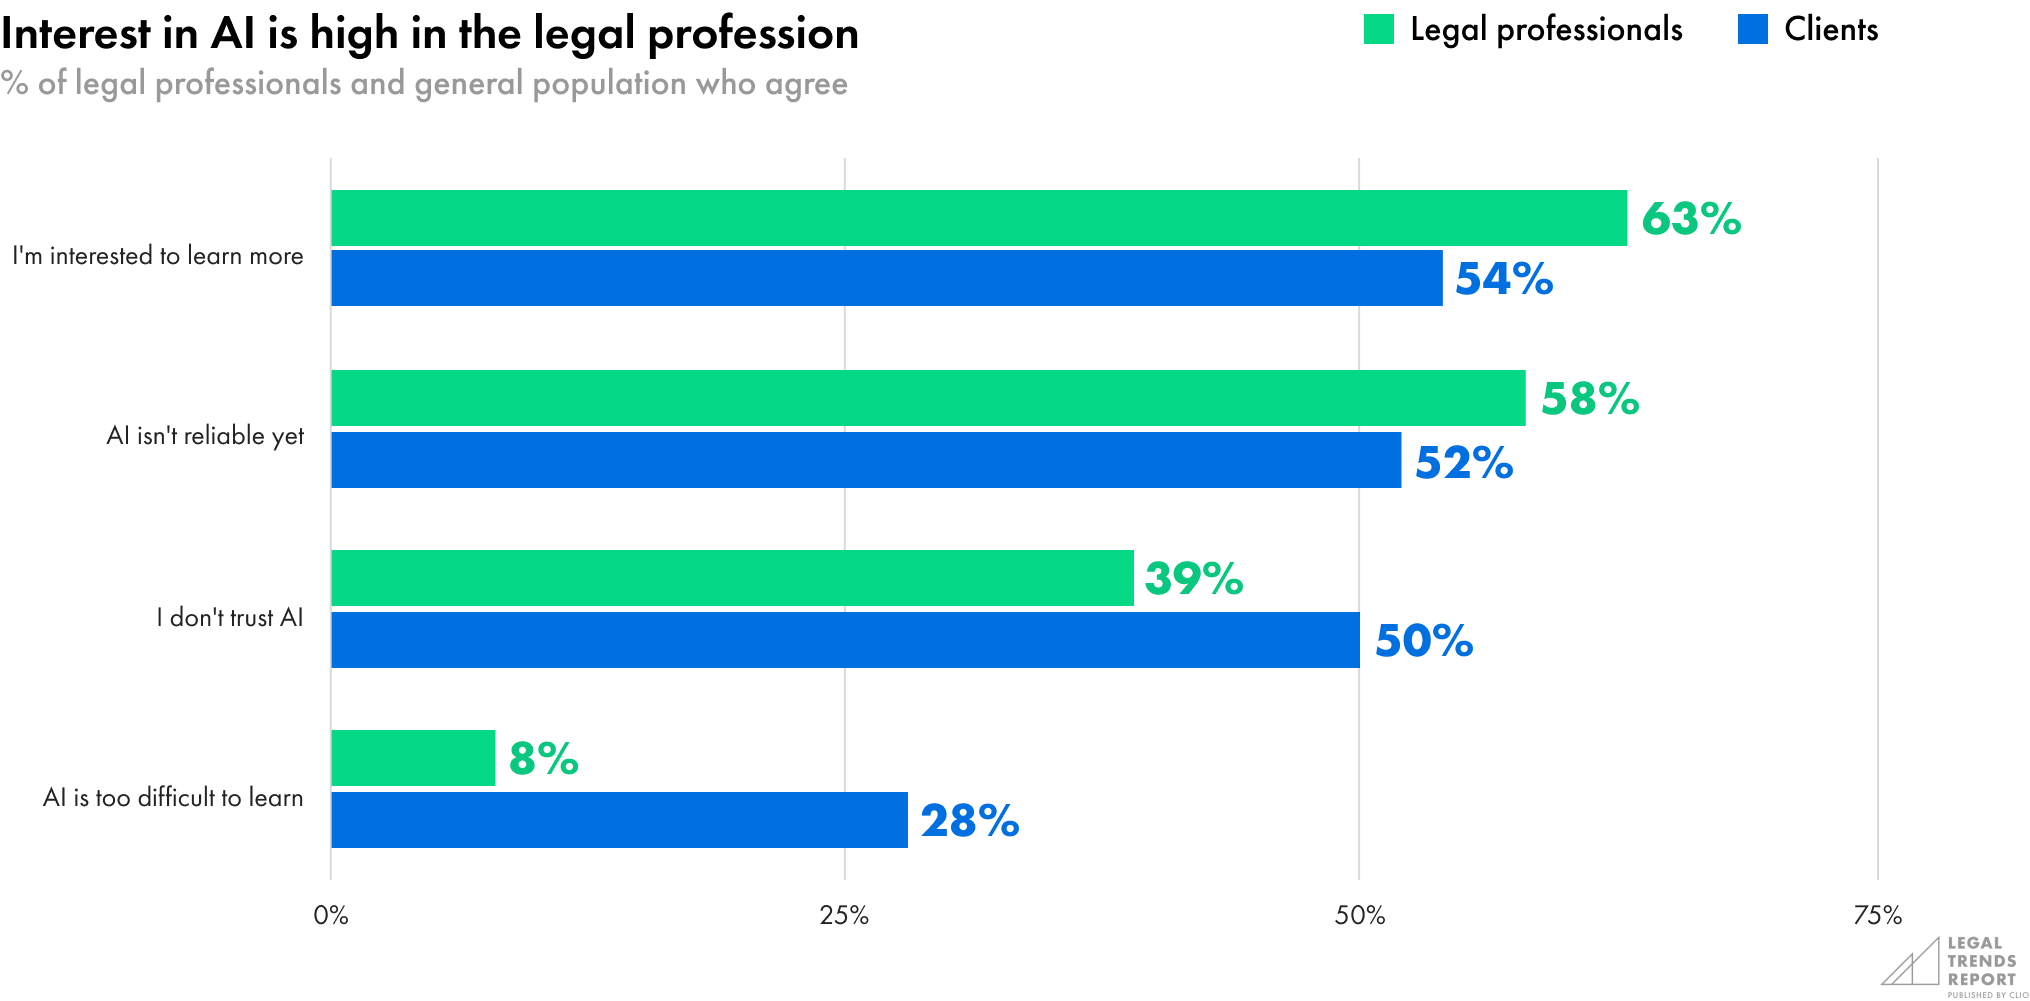 Interest in AI is high in the legal profession